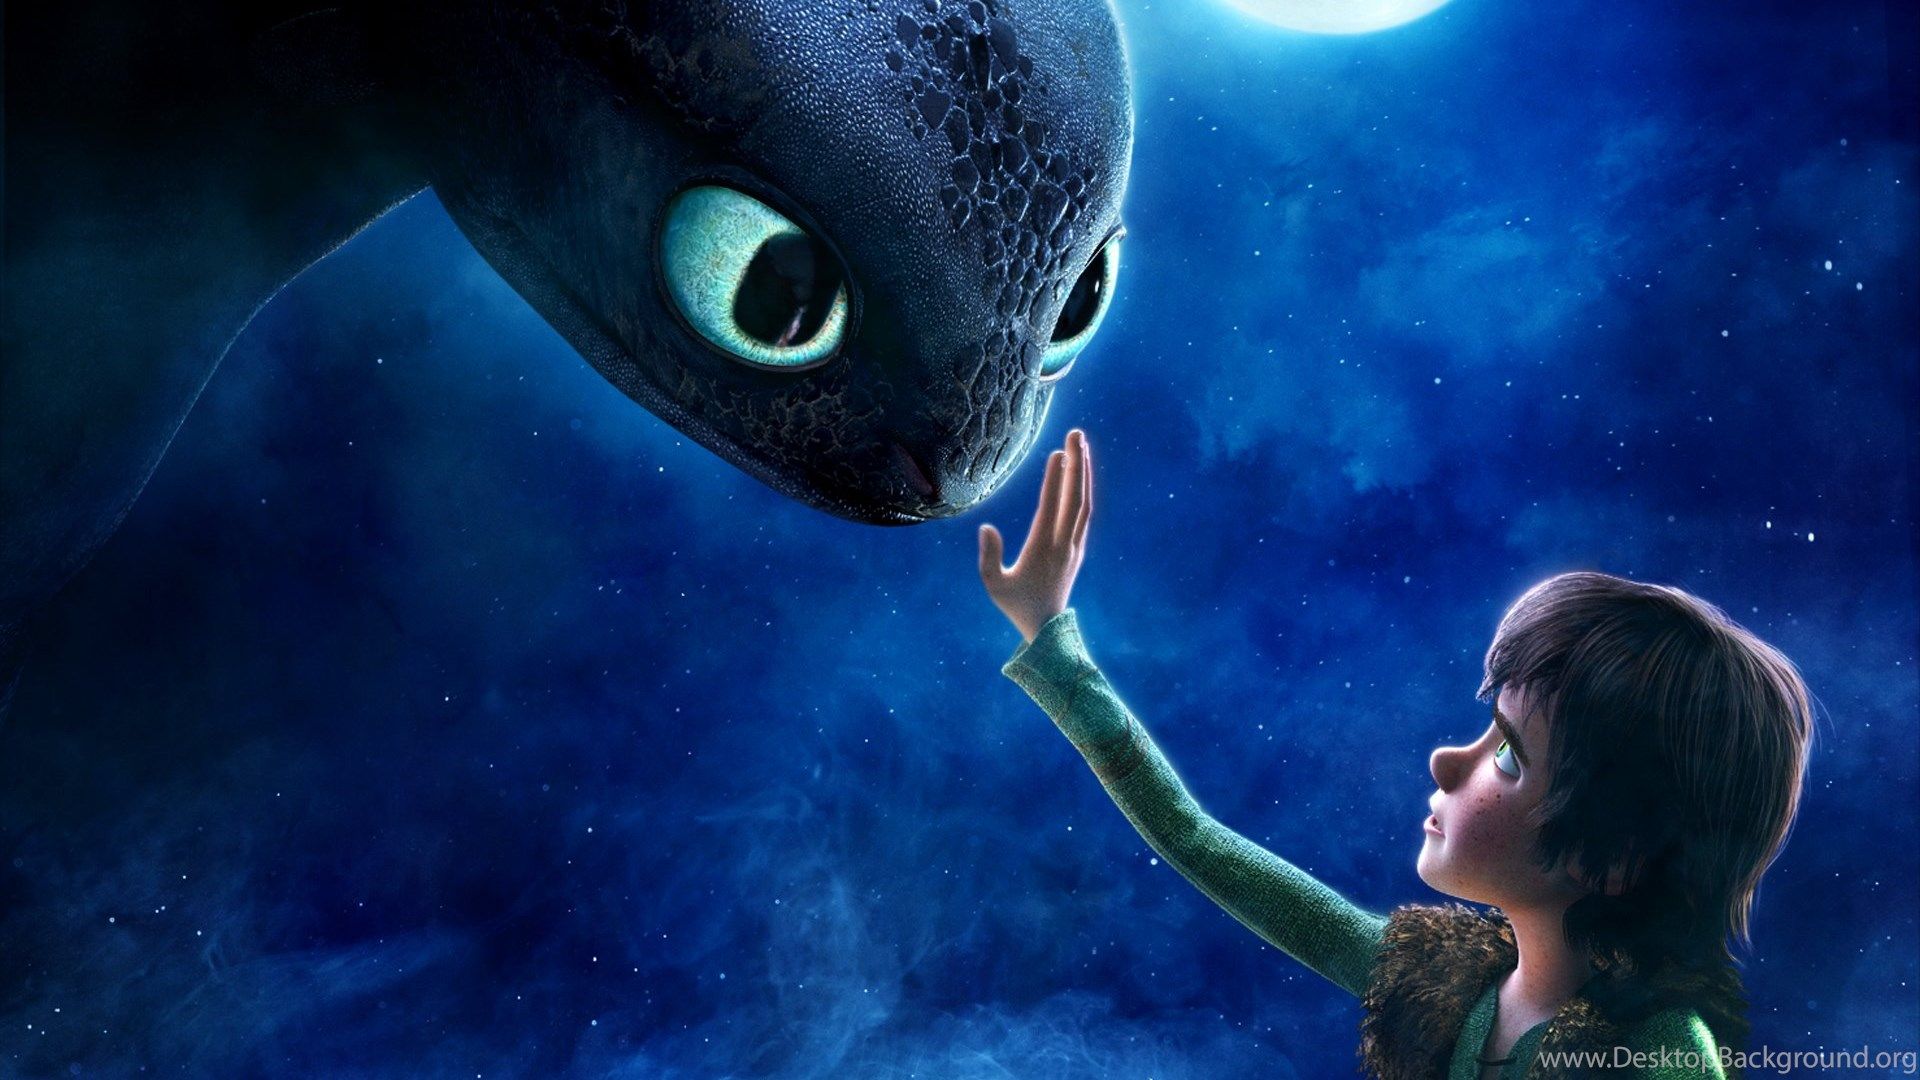 How To Train Your Dragon 2 Toothless Cute Wallpaper. Desktop Background